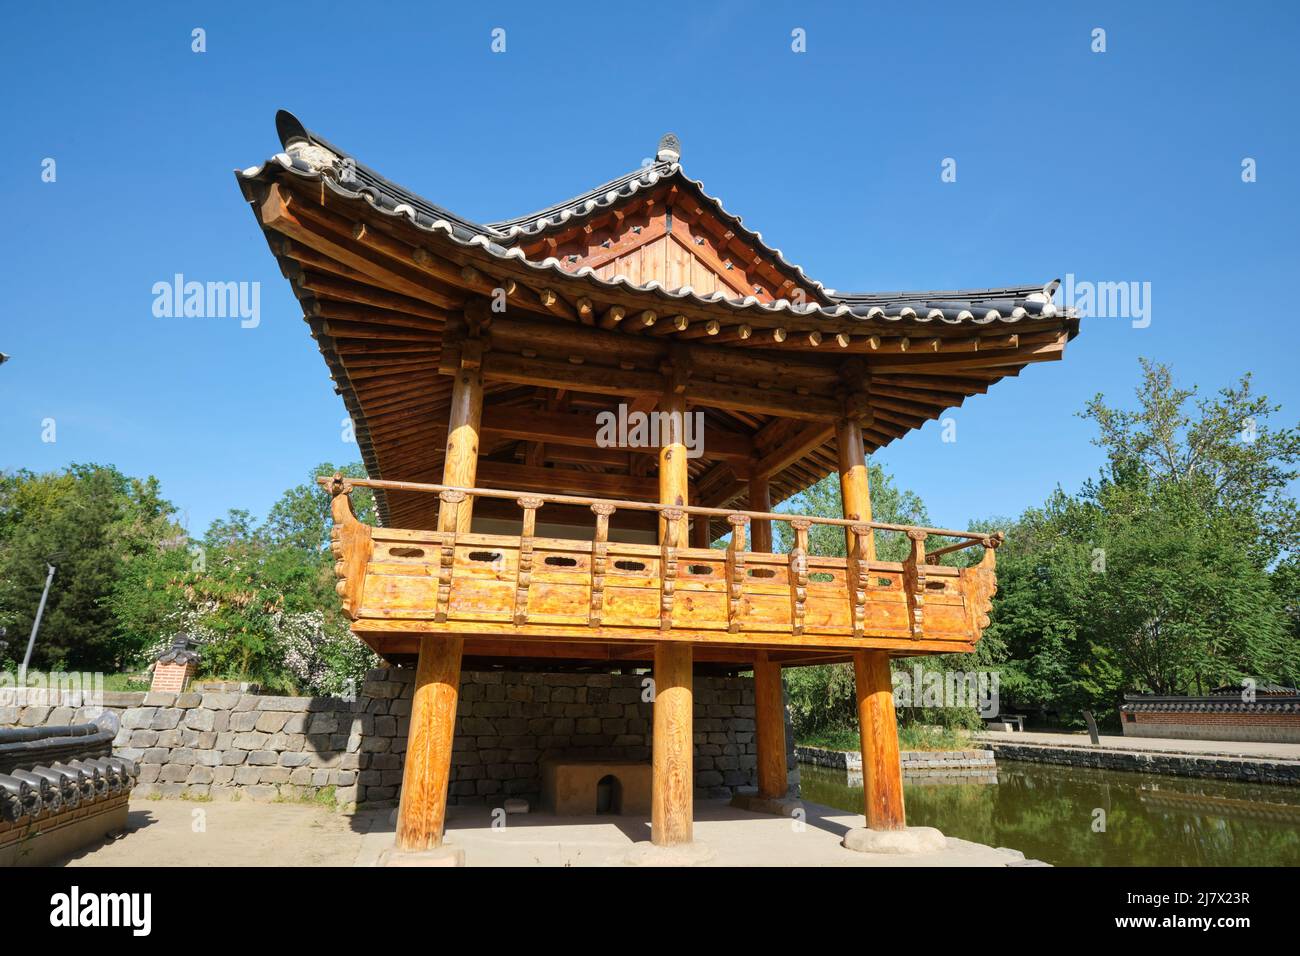 View of a big, wood pagoda by a pond. At the Seoul National Park in Tashkent, Uzbekistan, a bilateral, community greenspace project with Korea. Stock Photo